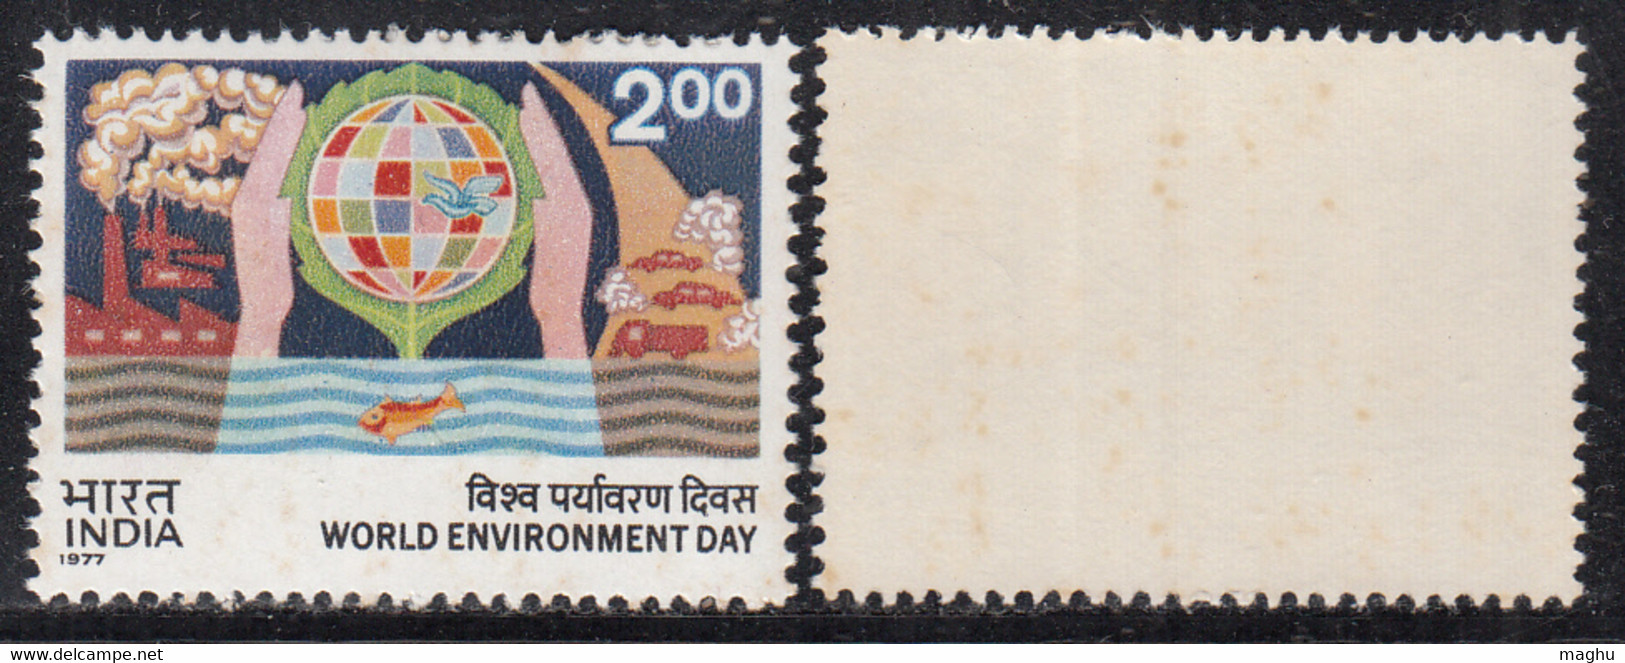 India 1977 MNH, World Environment Day, Hand, Globe Pollution, Fish, Bird, Car, Automobile, Nature, Climate, Stain @ Back - Pollution